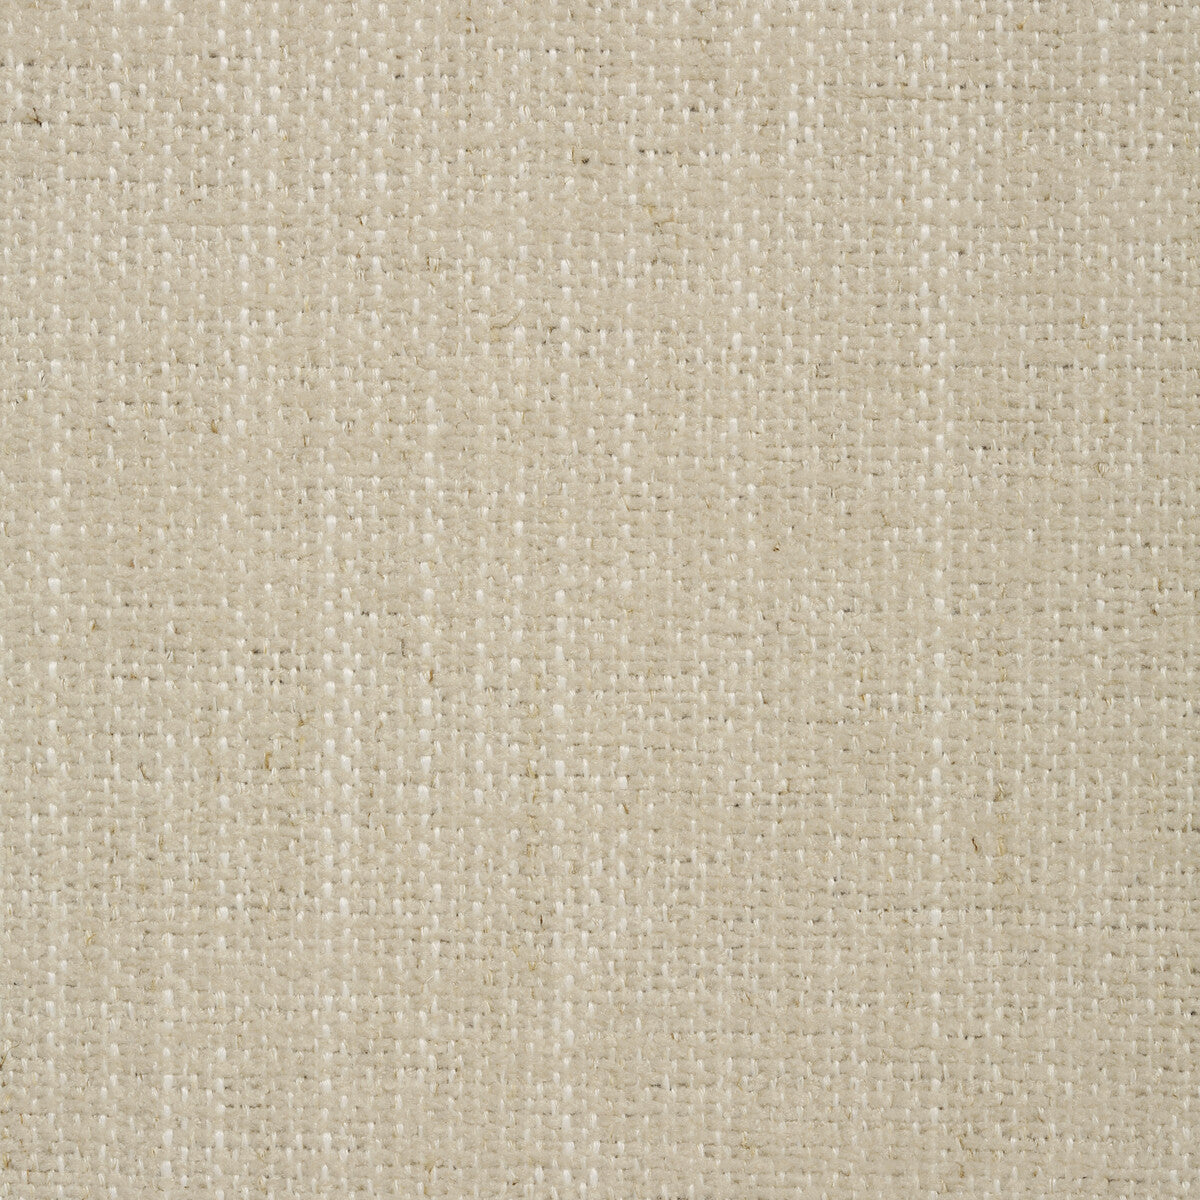 Kravet Smart fabric in 35111-1116 color - pattern 35111.1116.0 - by Kravet Smart in the Performance Crypton Home collection